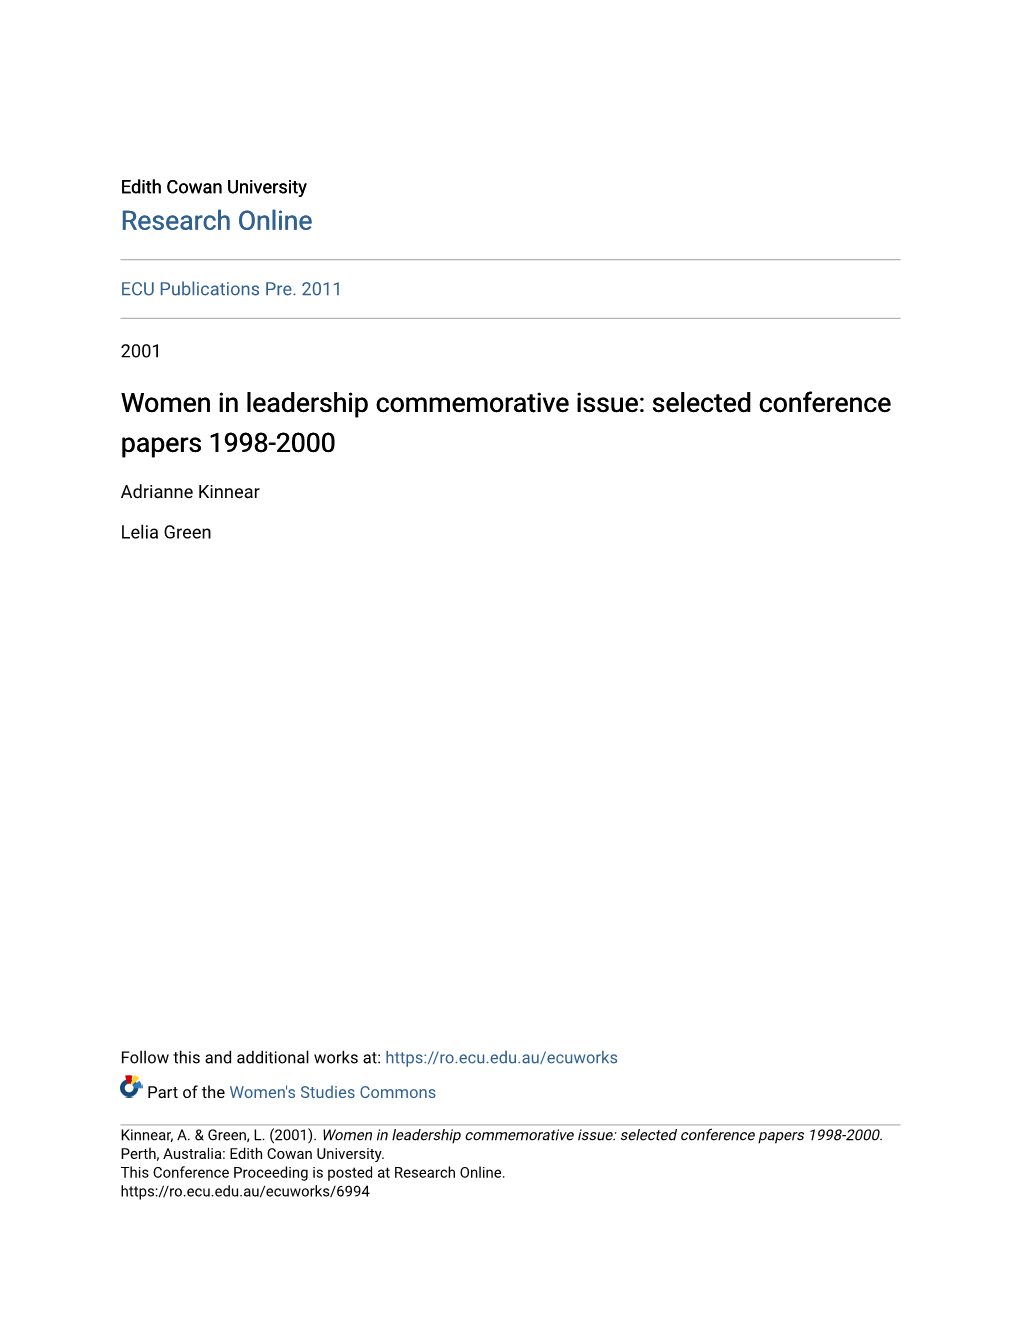 Women in Leadership Commemorative Issue: Selected Conference Papers 1998-2000